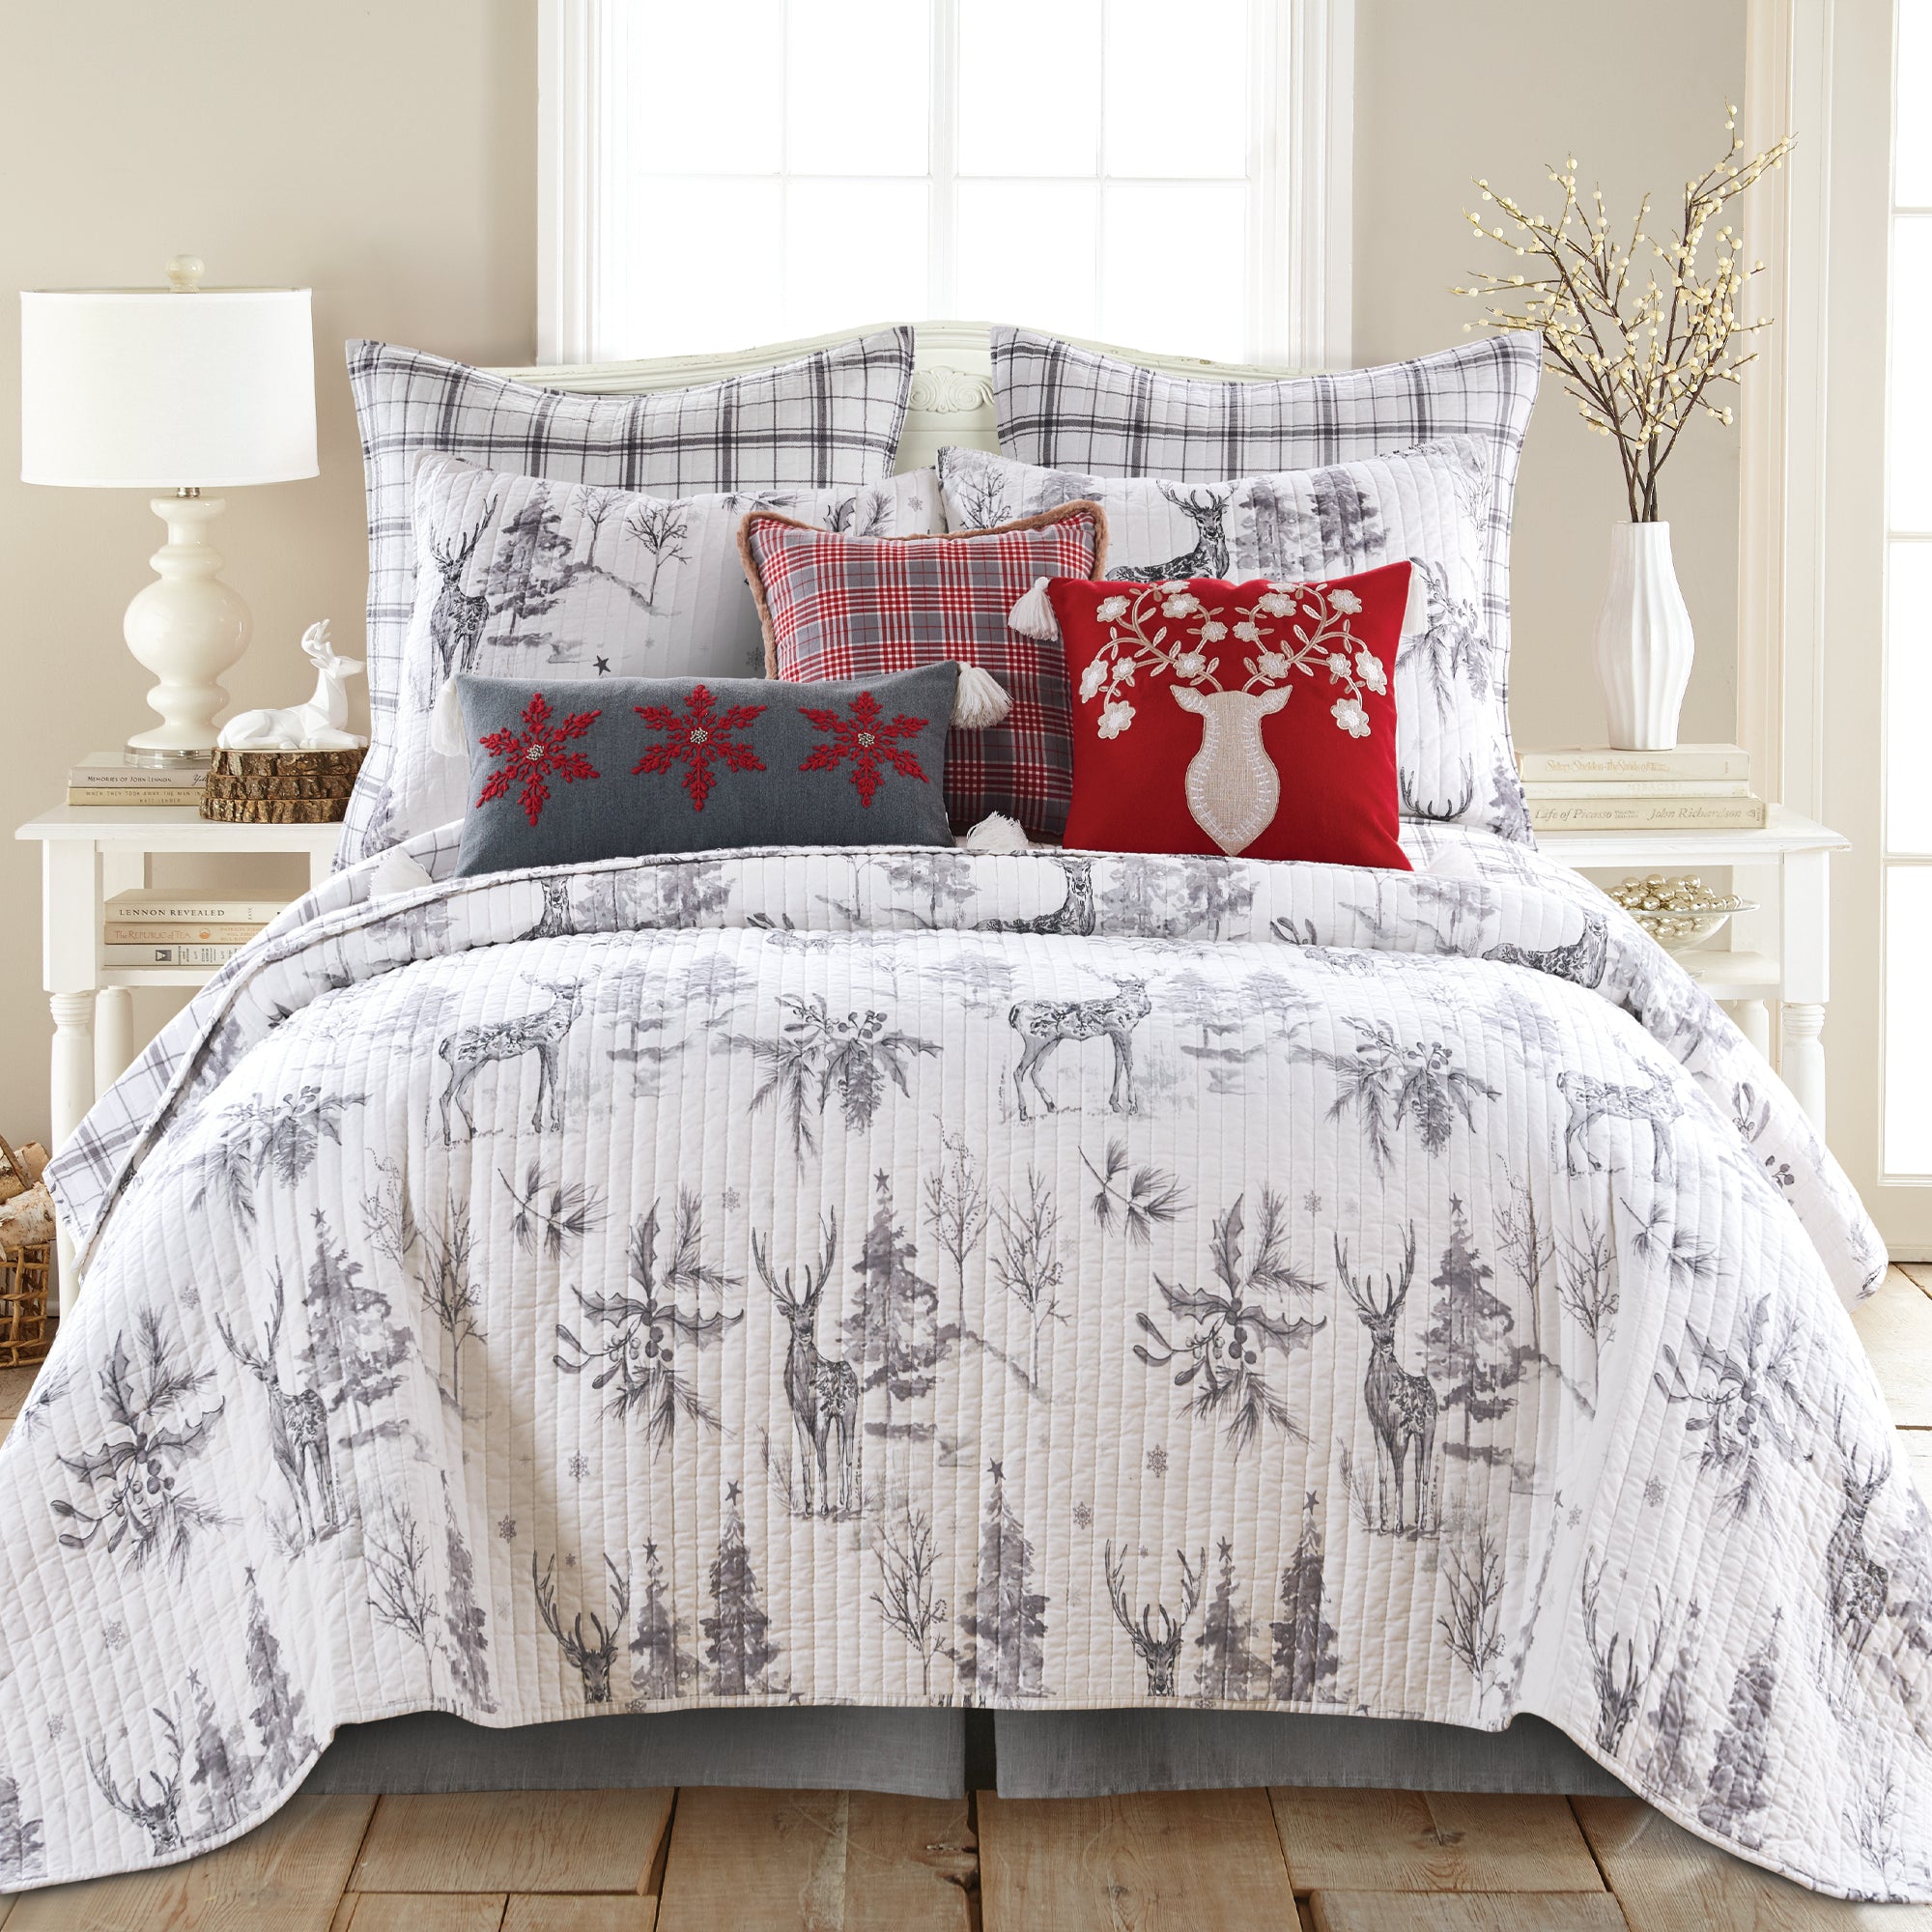 Sleigh Bells Grey Embroidered Snowflake Pillow